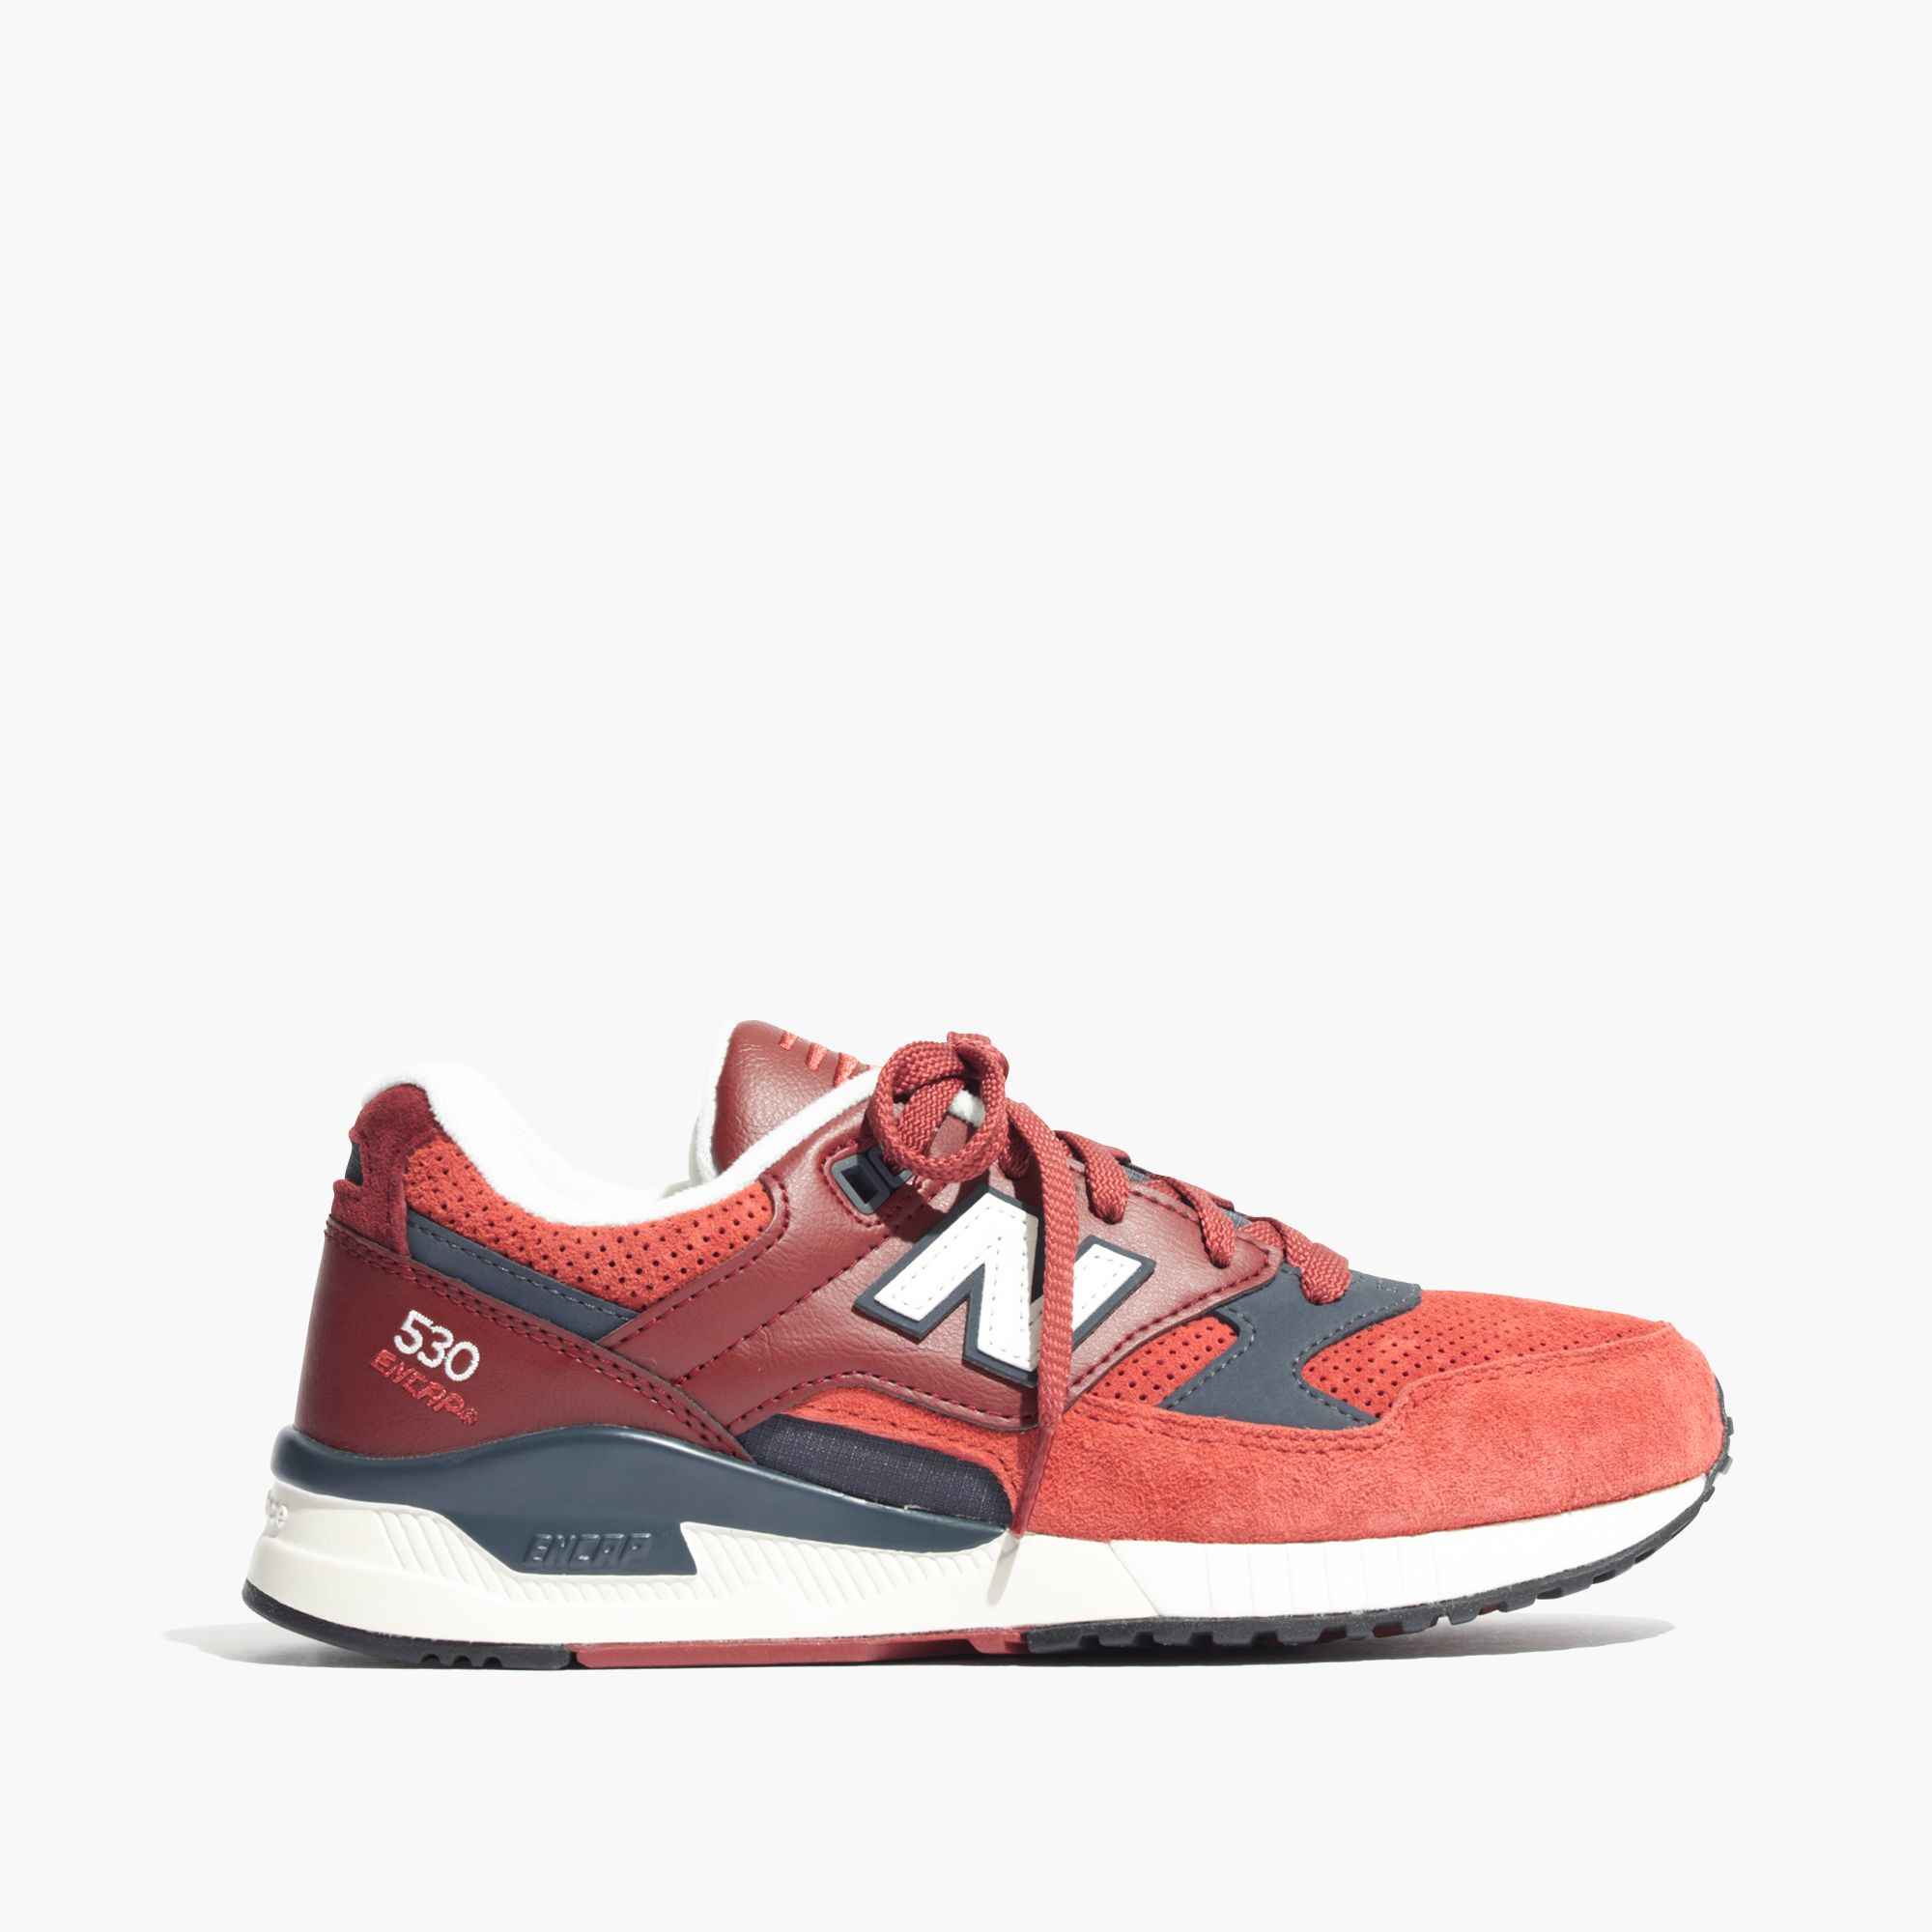 Madewell Suede New Balance® 530 Sneakers in Red for Men - Lyst